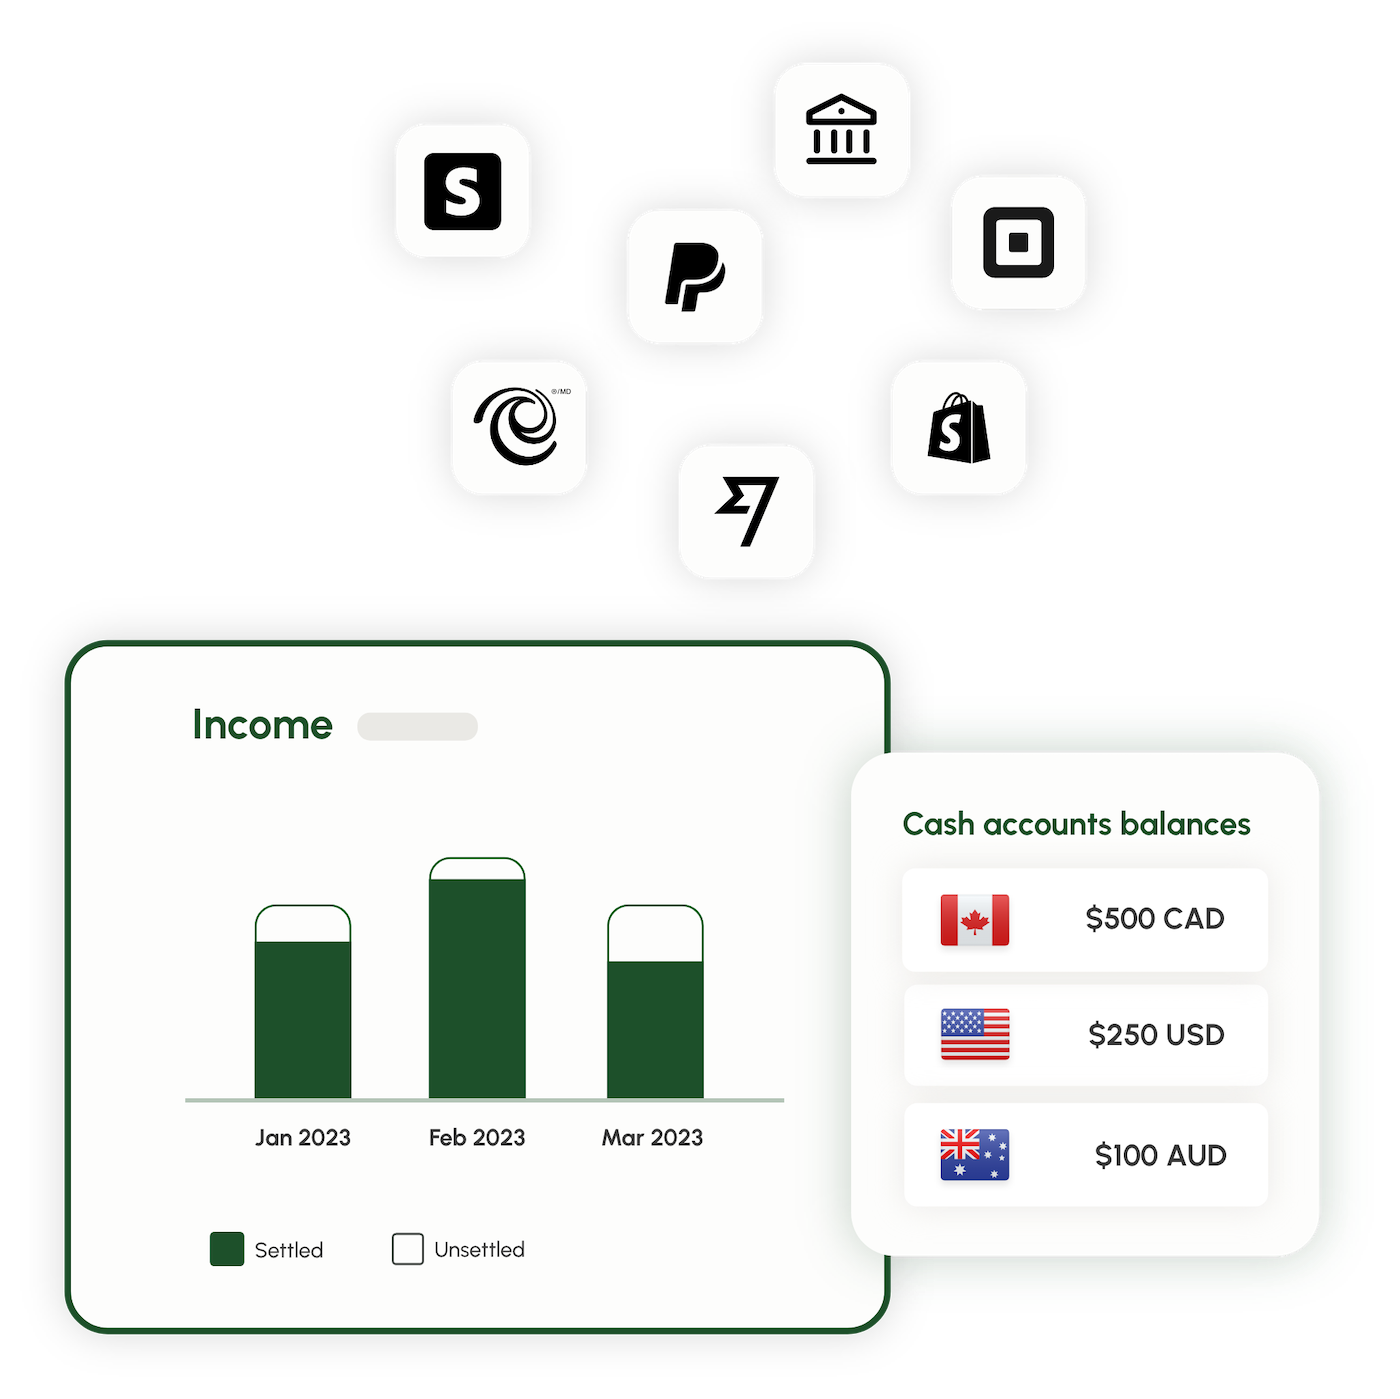 Screenshot of the Ceedar app showcasing its benefits such as seamless financial data connection, visualization of settled and unsettled income, and summary of all accounts balances.